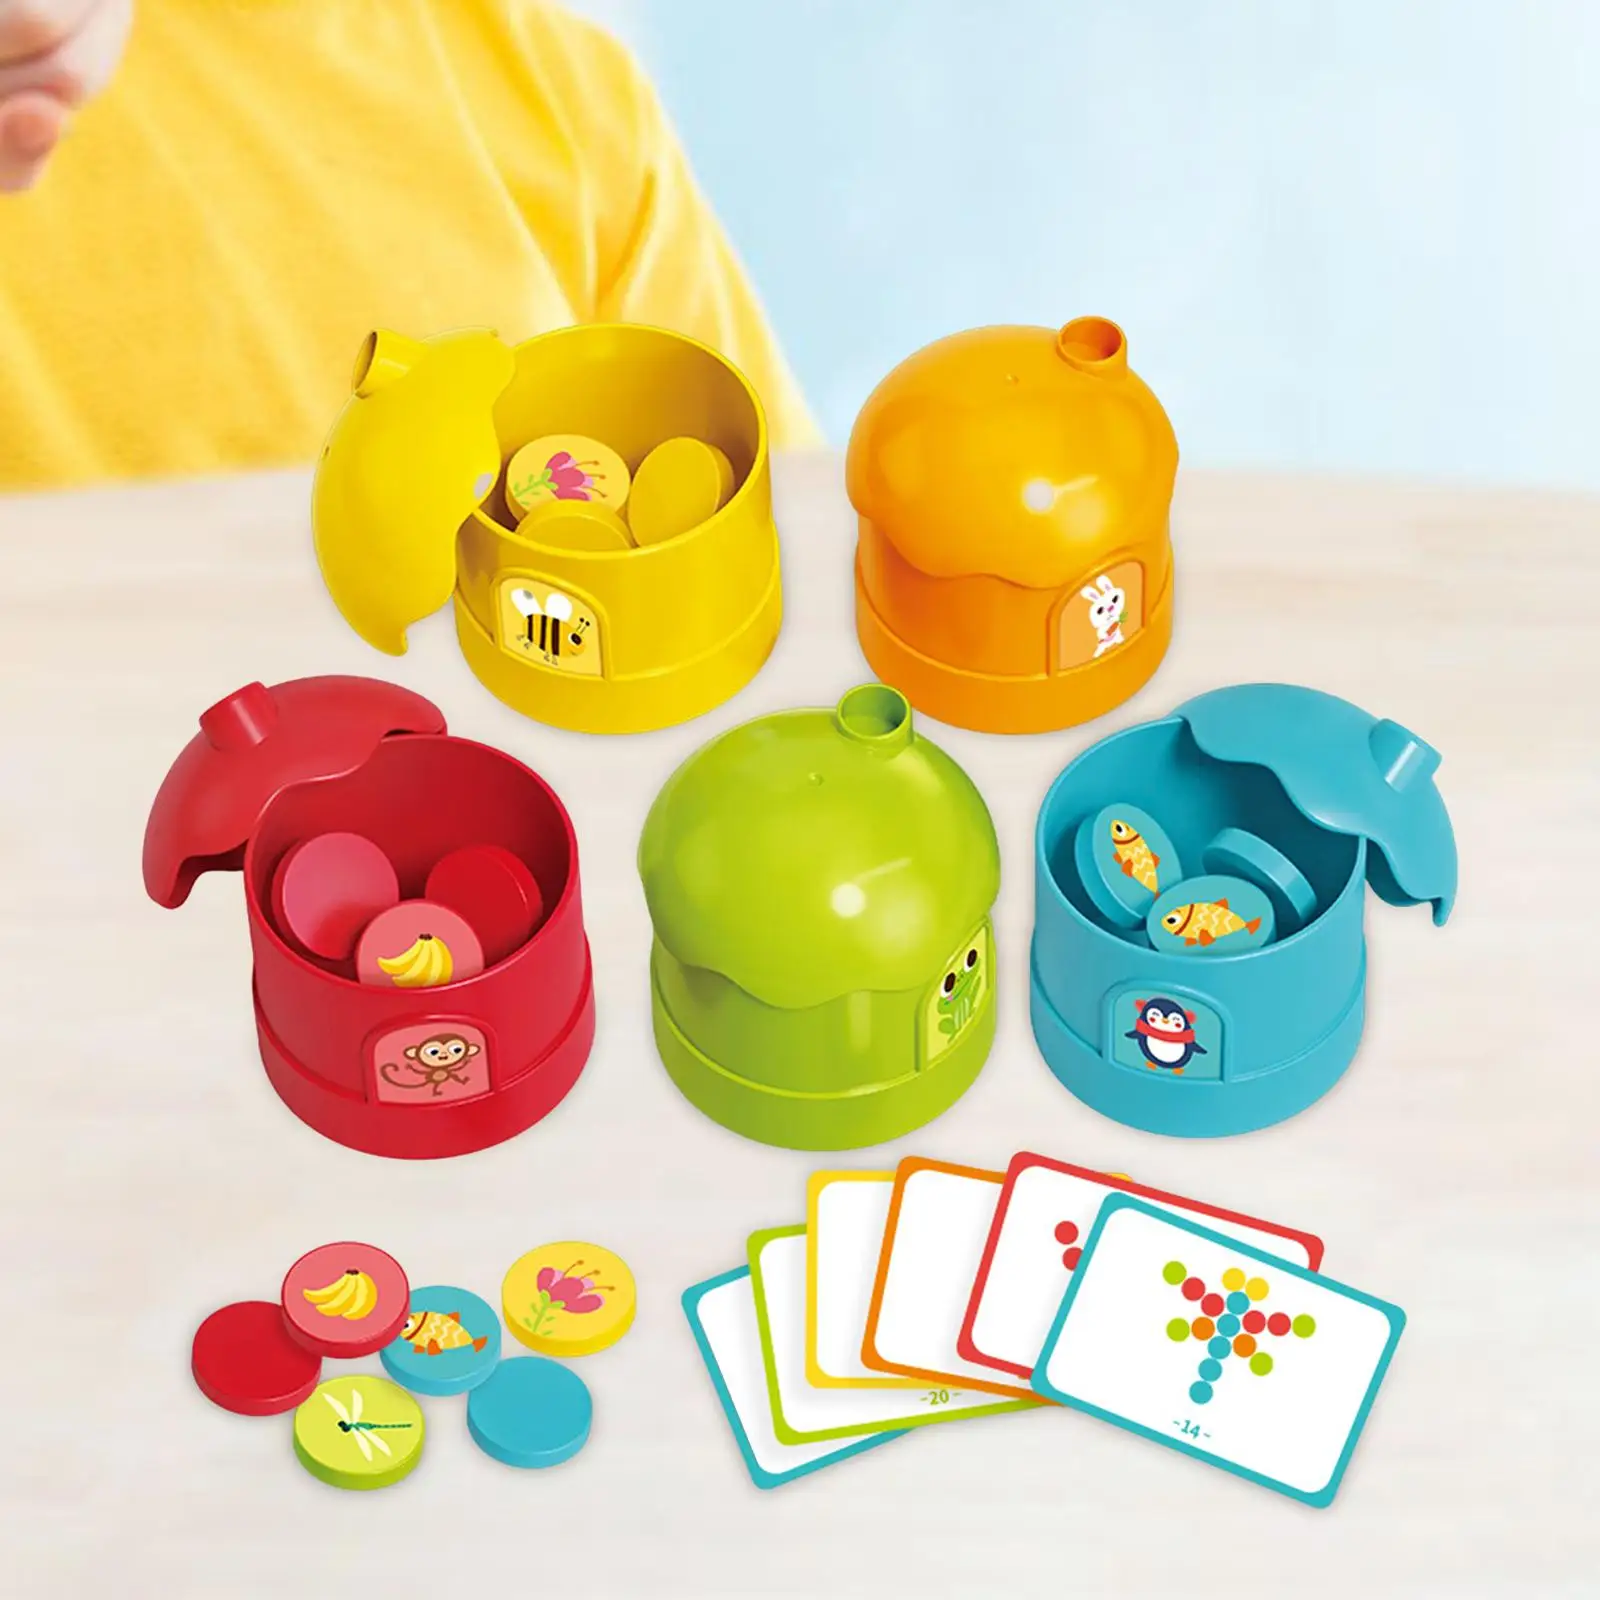 Sorting Cup Birthday Gift Multipurpose Math Teaching Aids Puzzle for Learning Activities Kindergarten Holiday Preschool Toddlers